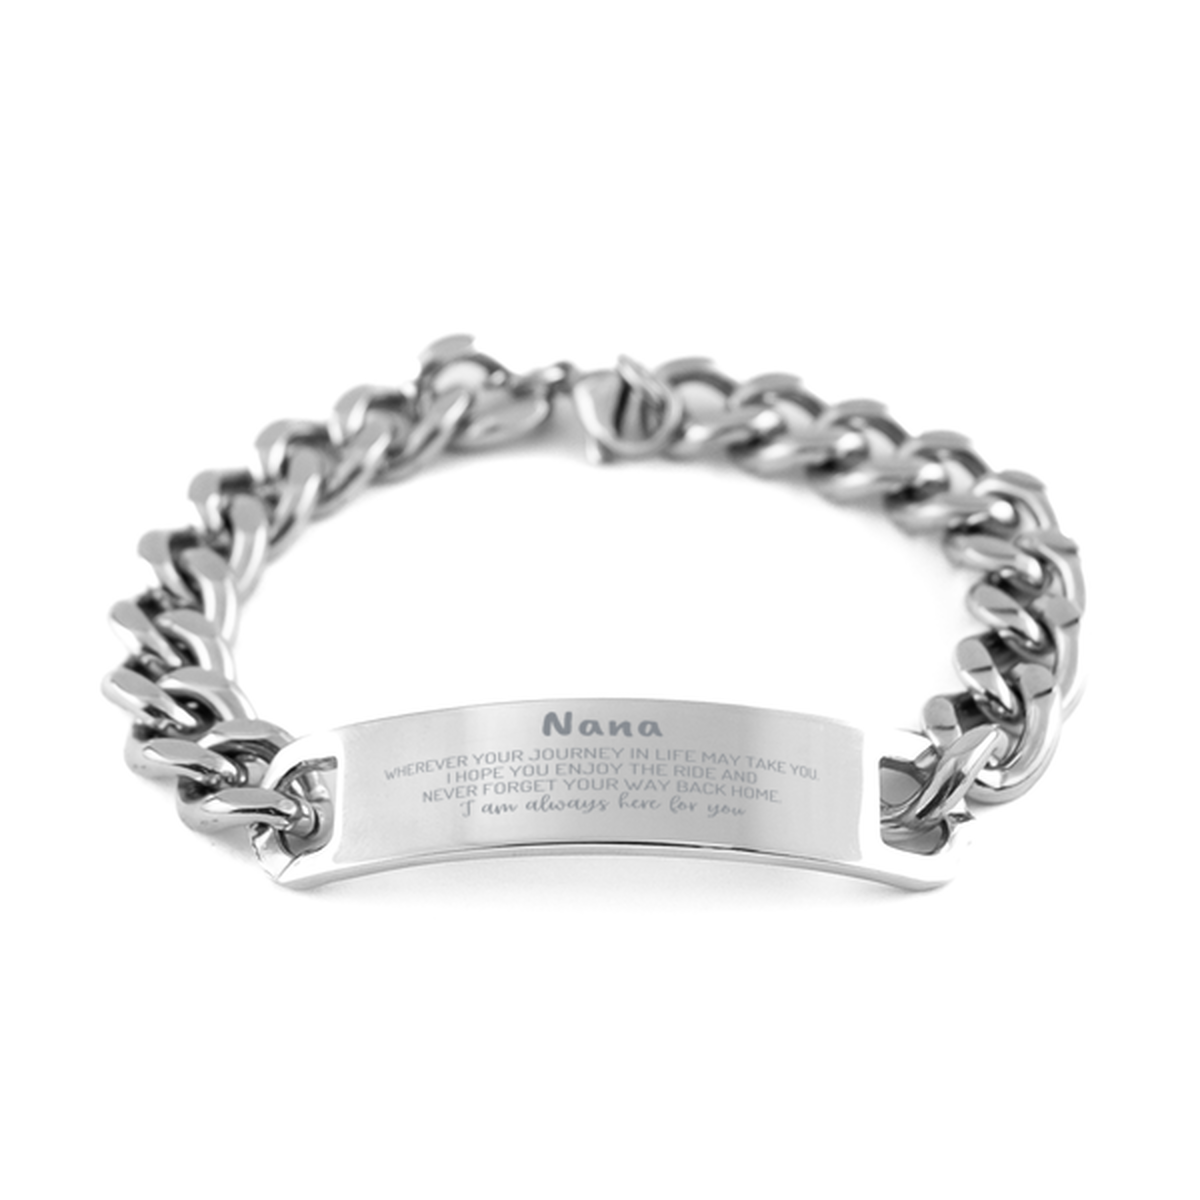 Nana wherever your journey in life may take you, I am always here for you Nana Cuban Chain Stainless Steel Bracelet, Awesome Christmas Gifts For Nana, Nana Birthday Gifts for Men Women Family Loved One